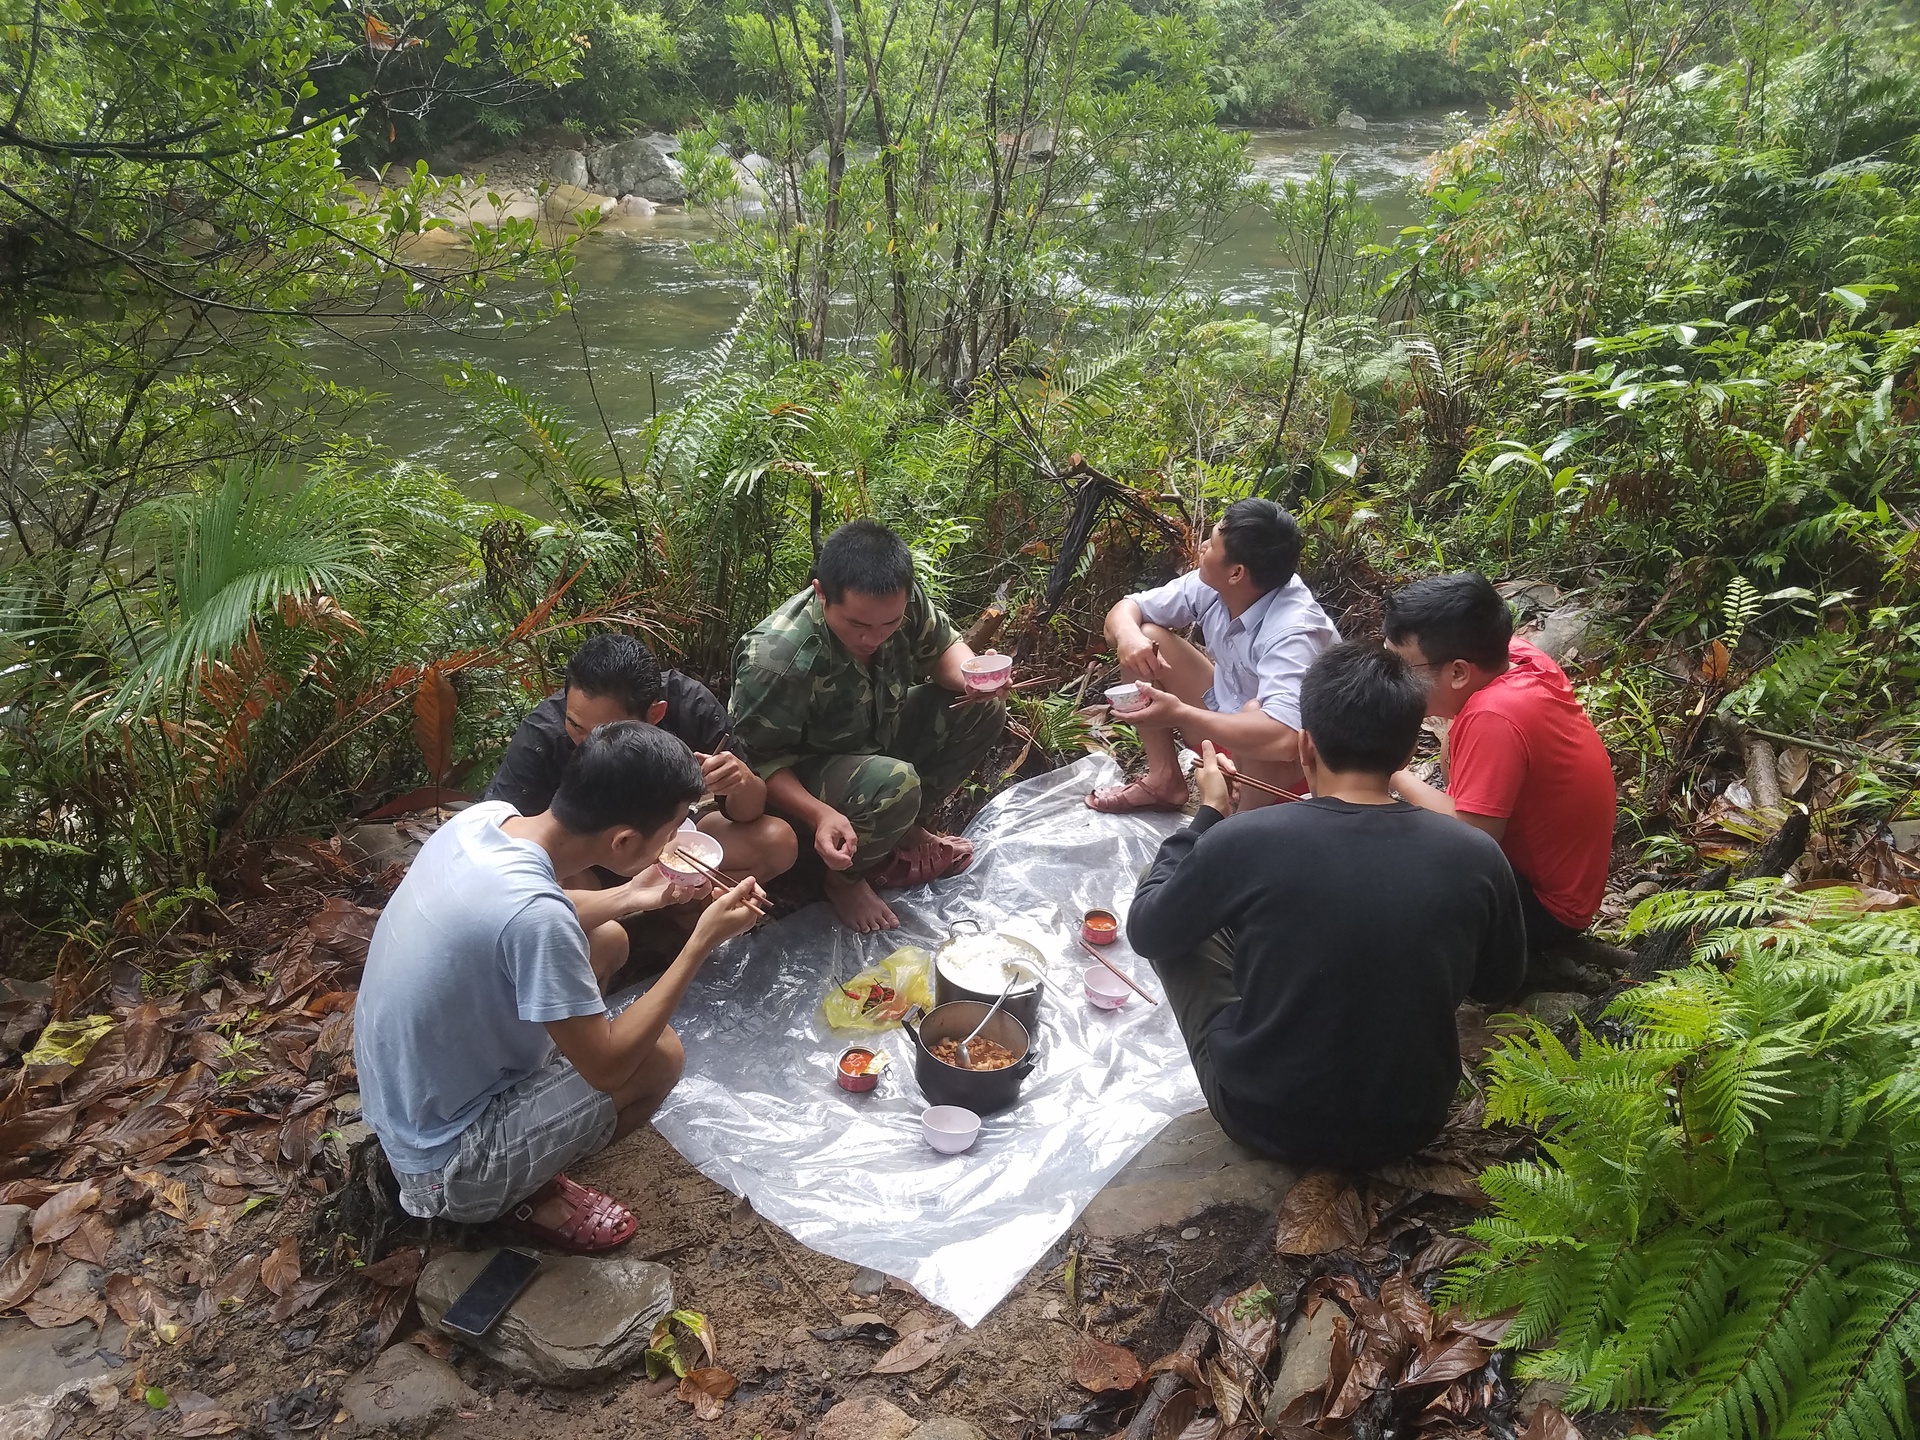 The park rangers charged with setting the camera traps at the Phong Dien Animal Sanctuary relax with a simple lunch in the middle of nature.